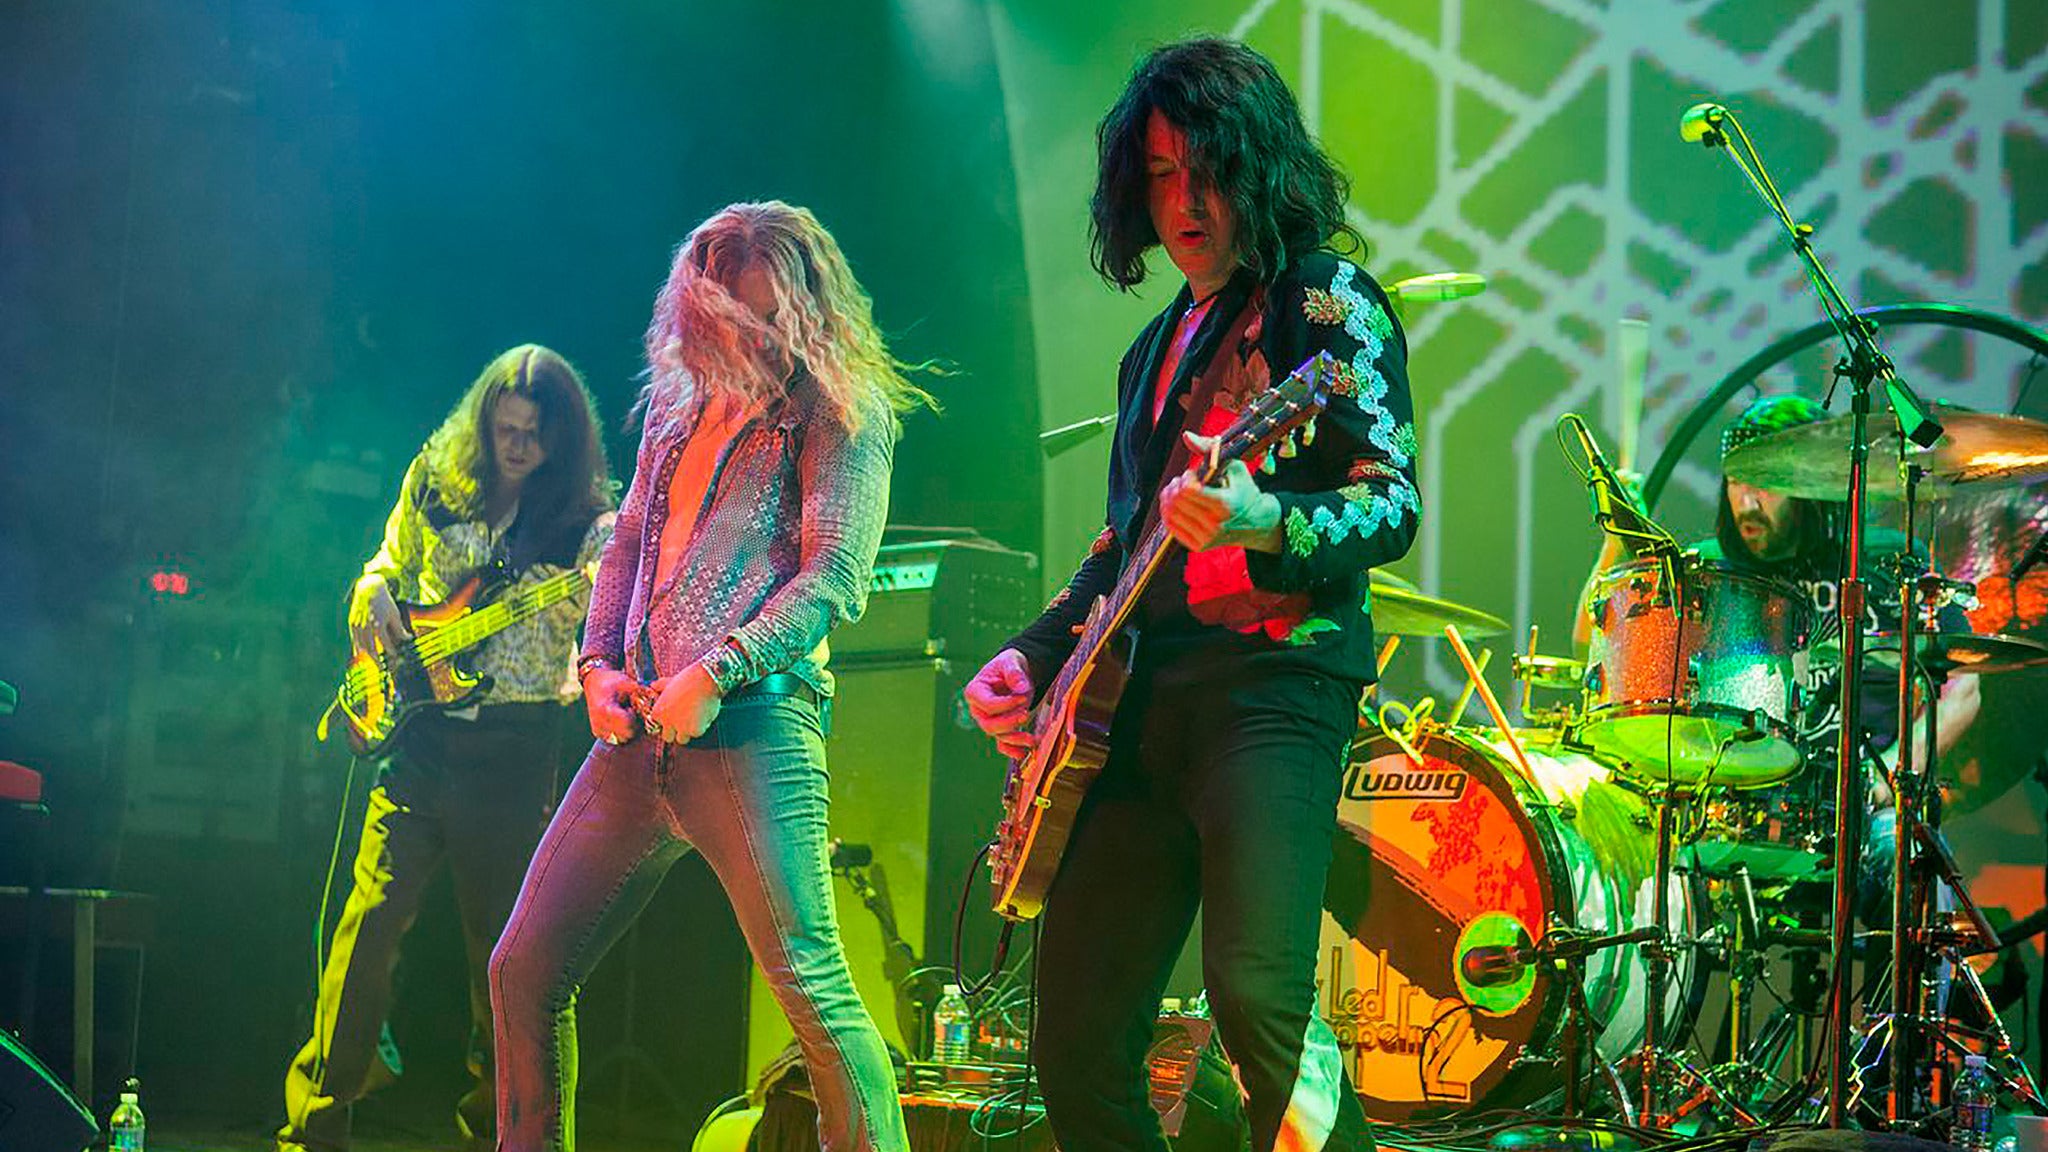 Led Zeppelin 2 pre-sale code for your tickets in Pittsburgh